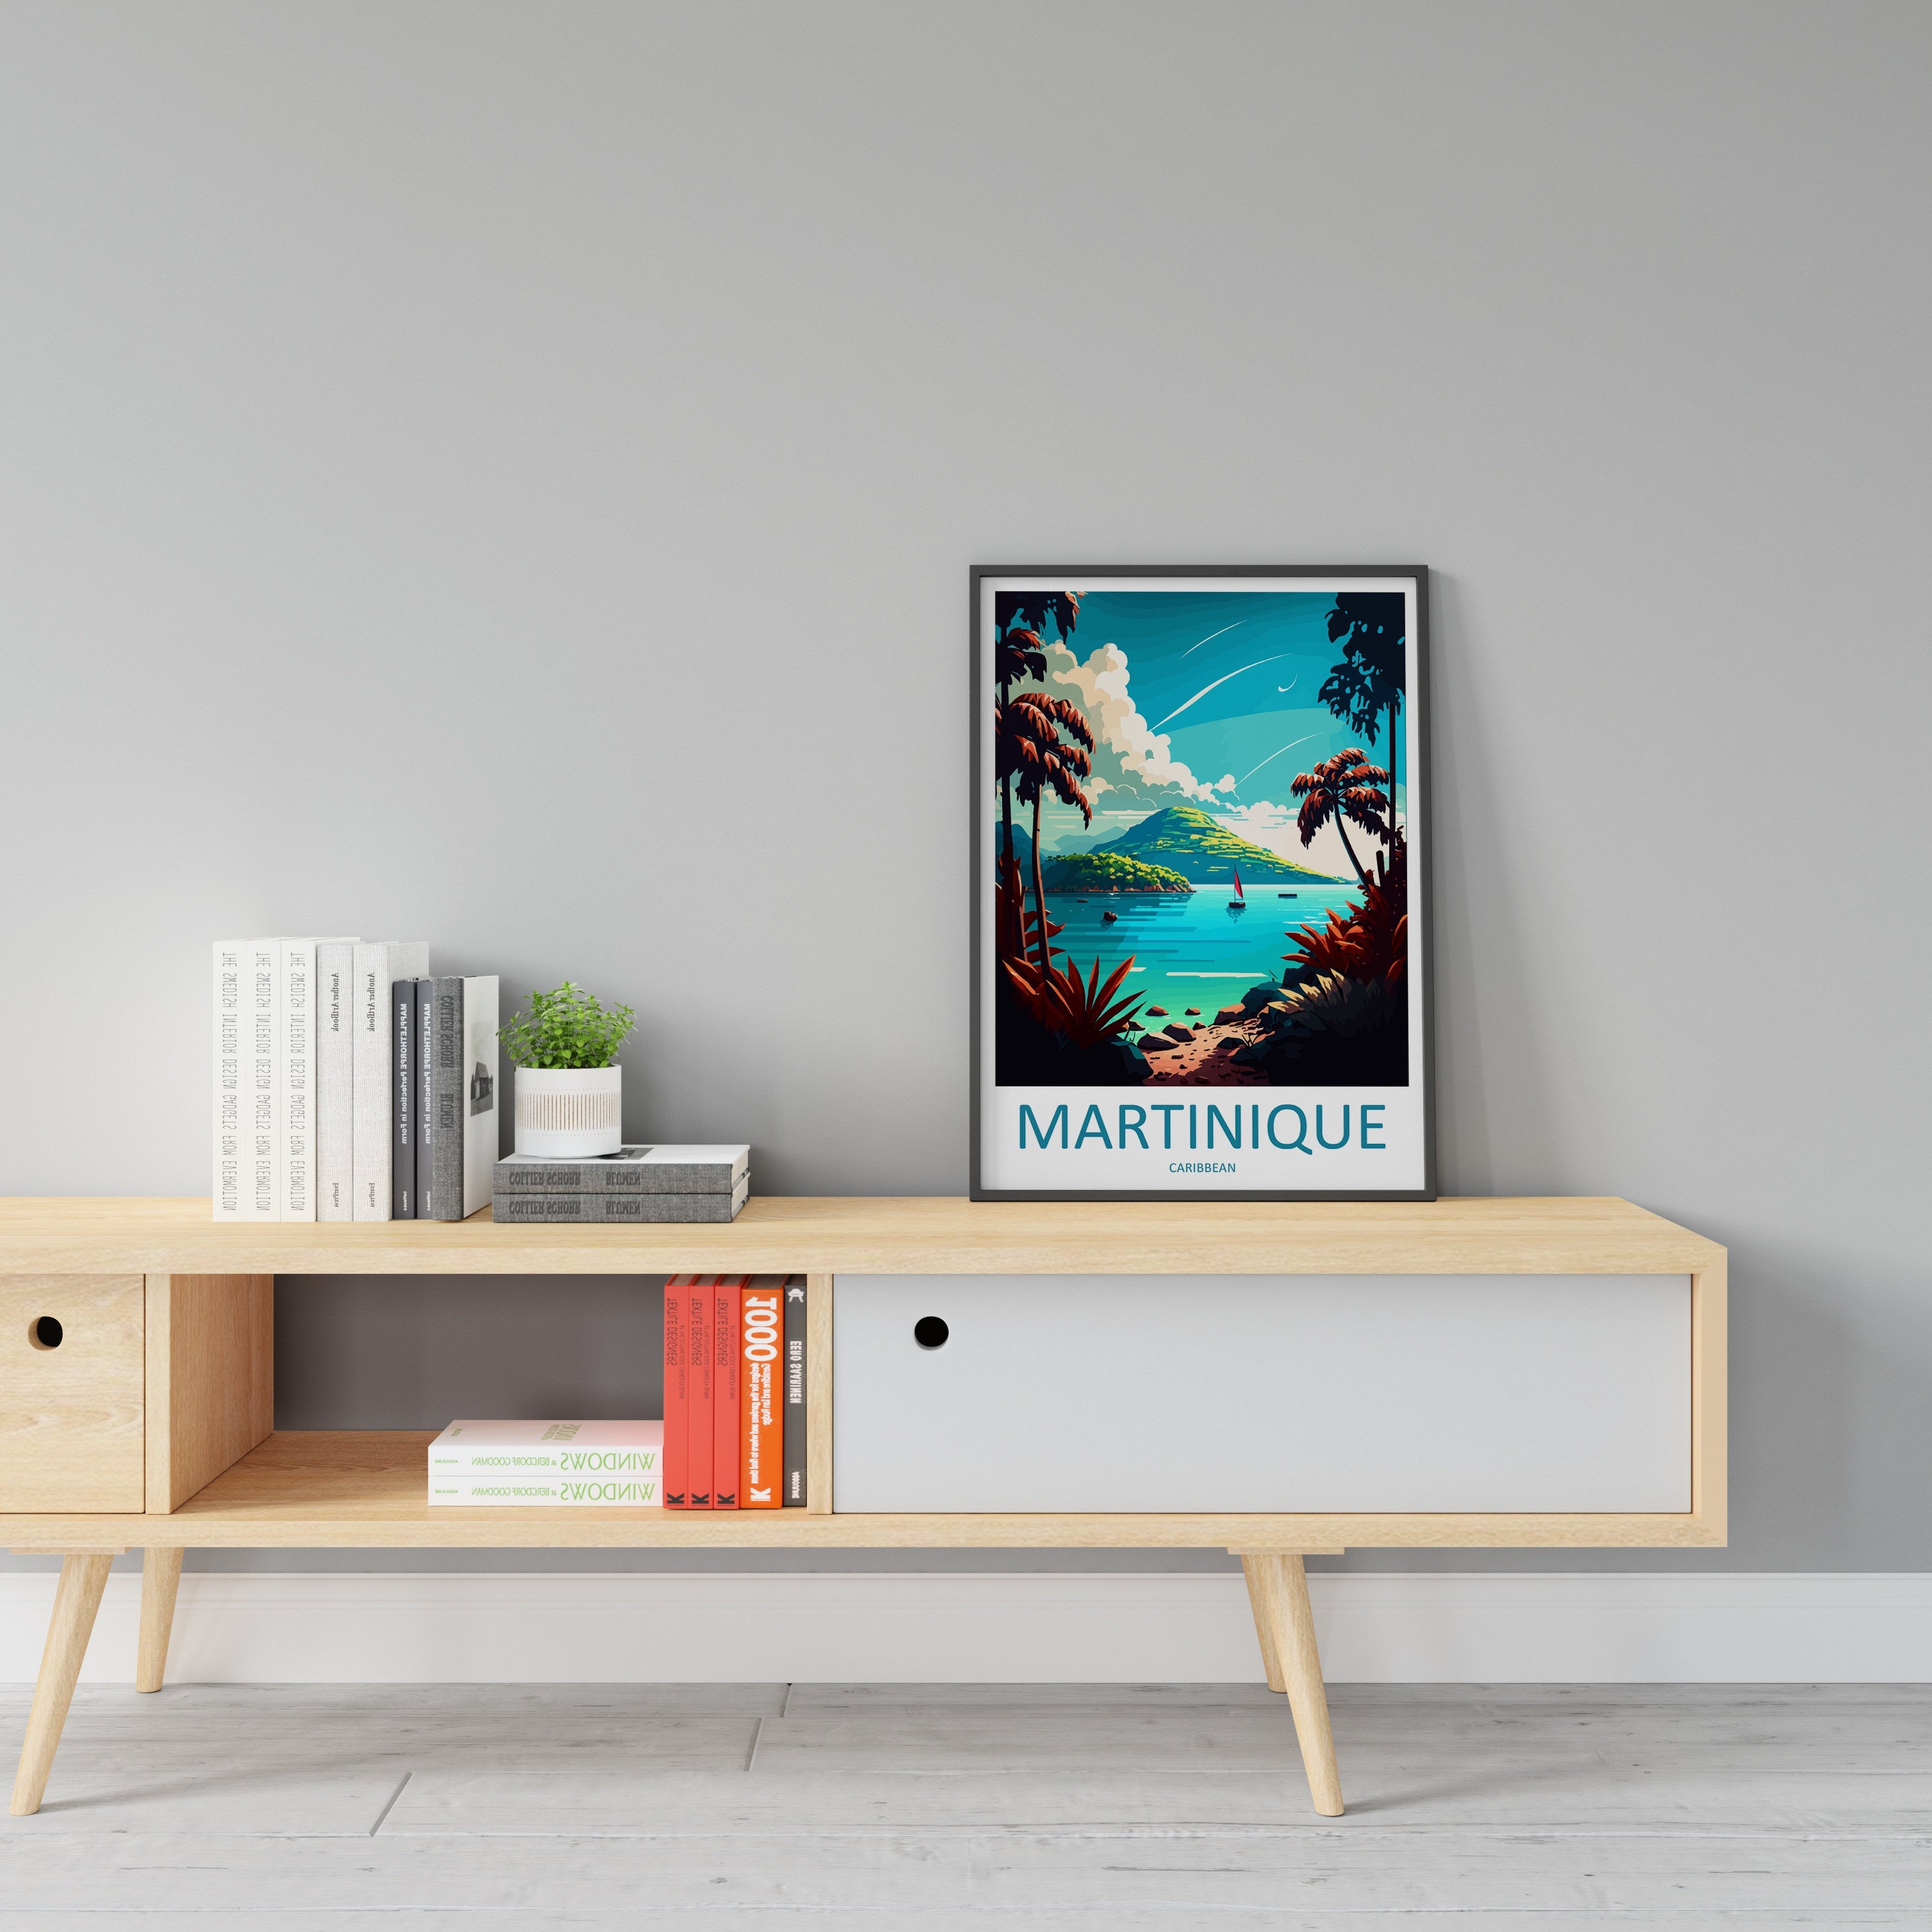 Martinique Travel Print Wall Art Martinique Wall Hanging Home Décor Martinique Gift Art Lovers Wall Art Caribbean Travel Print Poster Gift